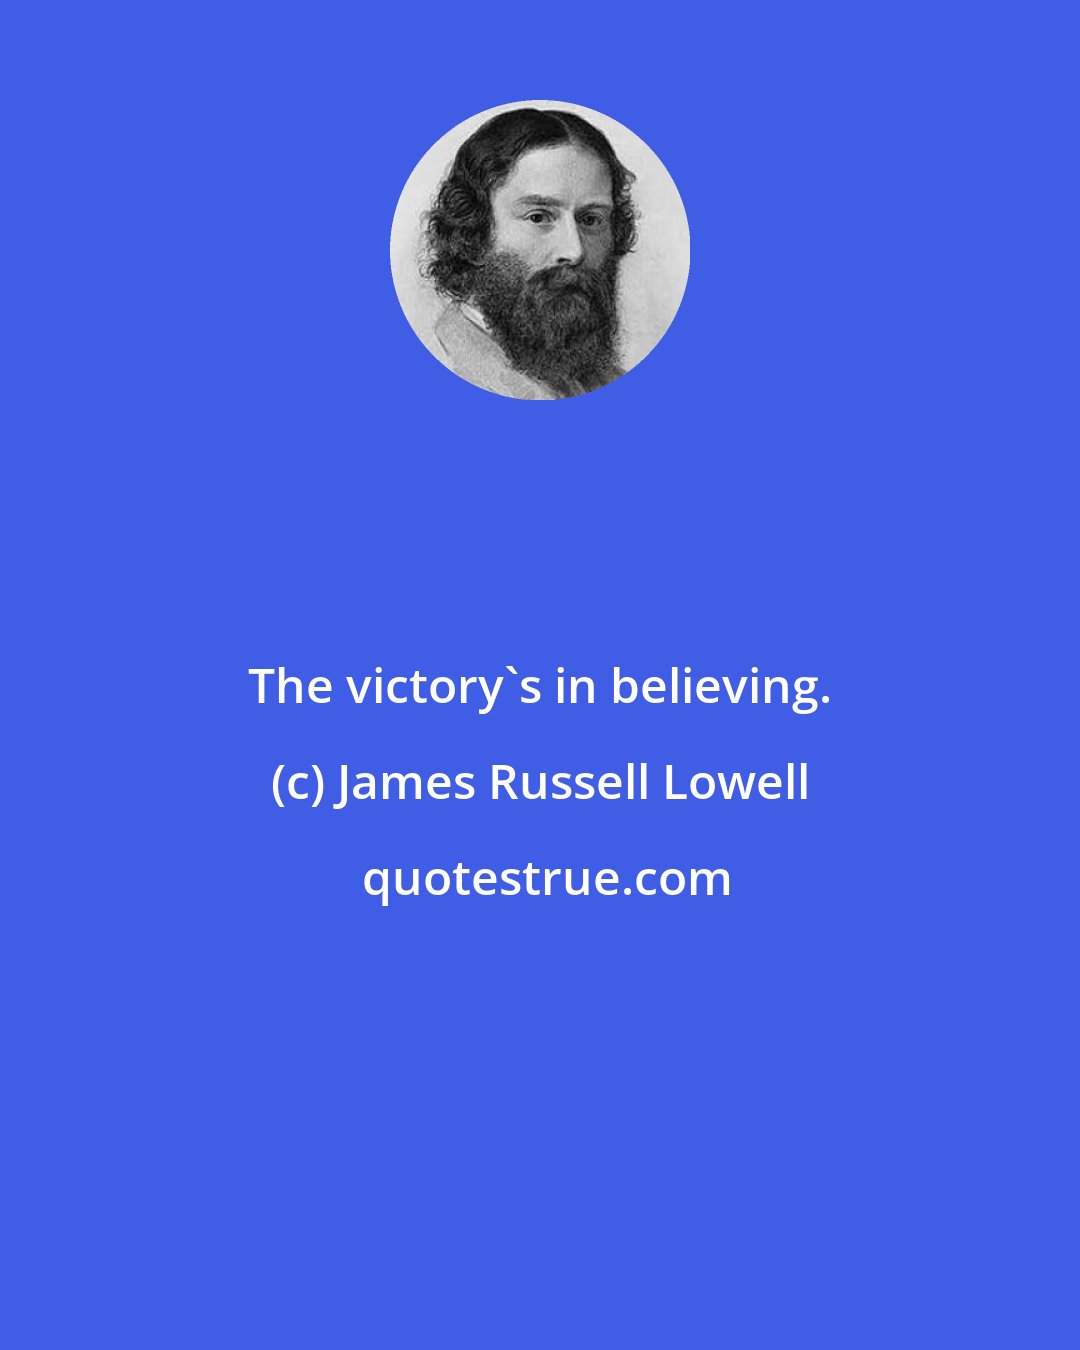 James Russell Lowell: The victory's in believing.